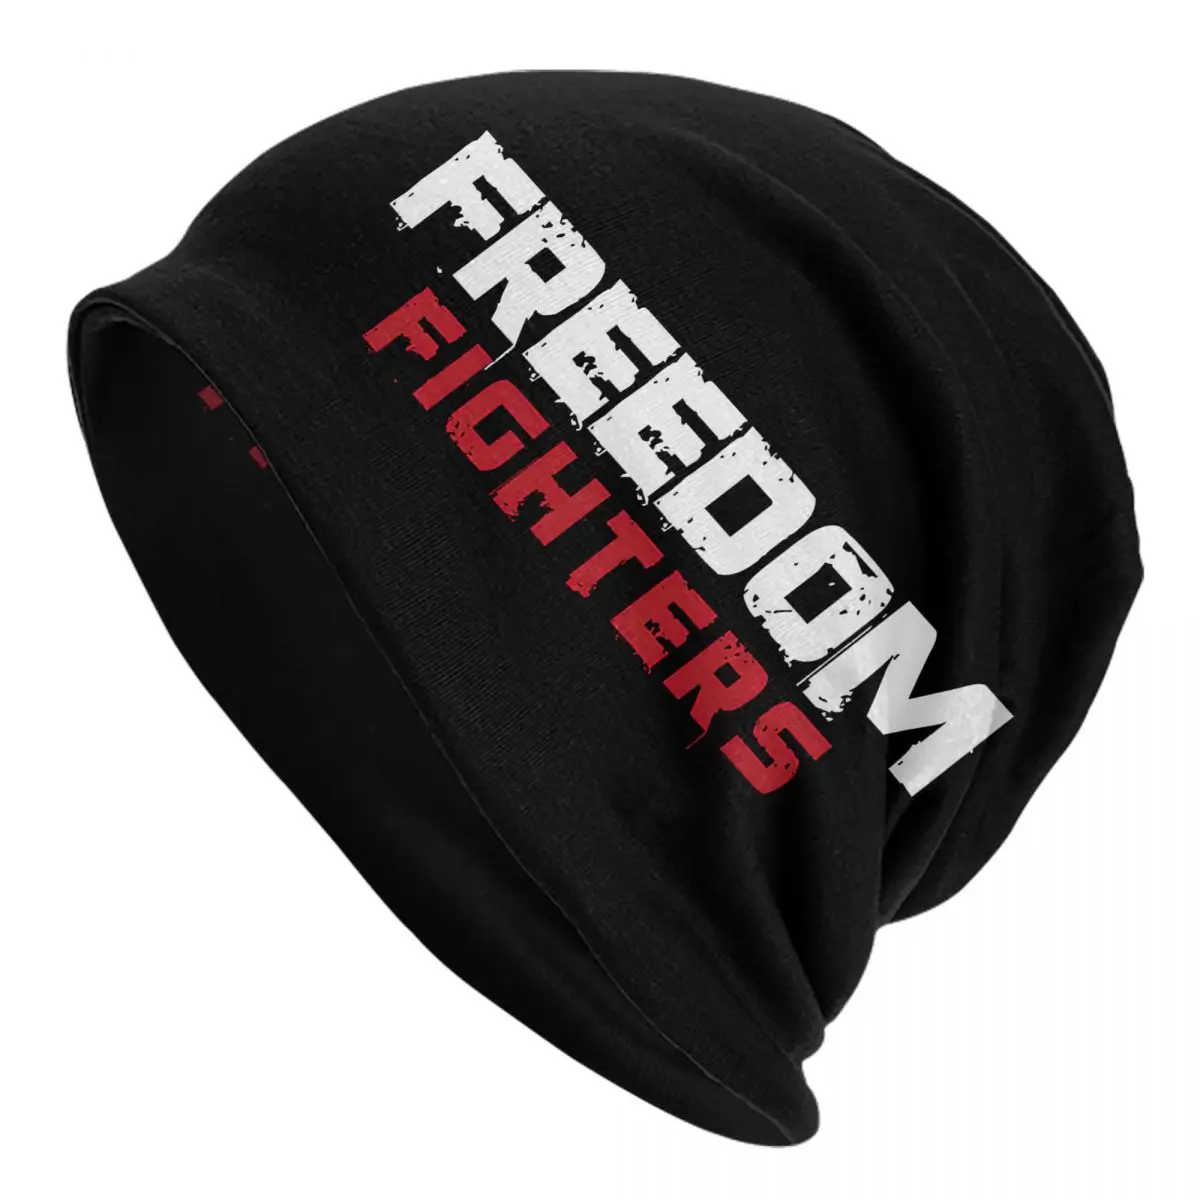 Memorial Day Veterans Day 4th Of July American Freedom Fighters Independence Day Adult Men's Women's Knit Hat Keep warm winter